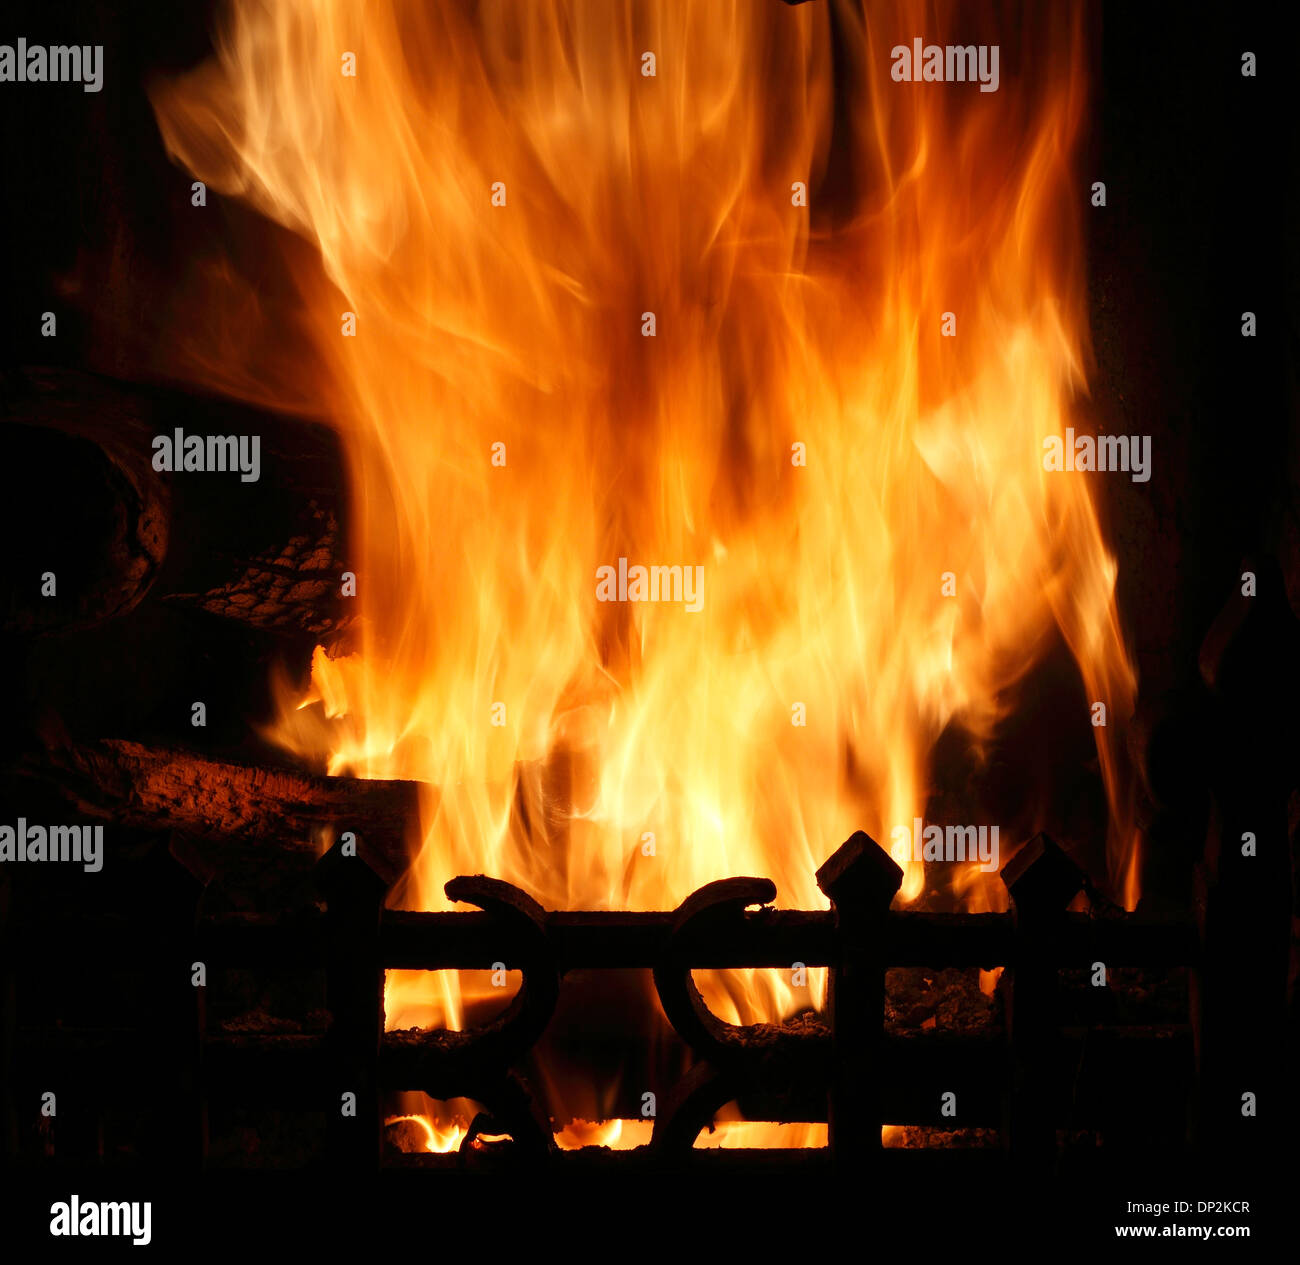 Fire in domestic hearth, heat flame flames heating fireside warmth fires grate burning wood coal home fires Stock Photo